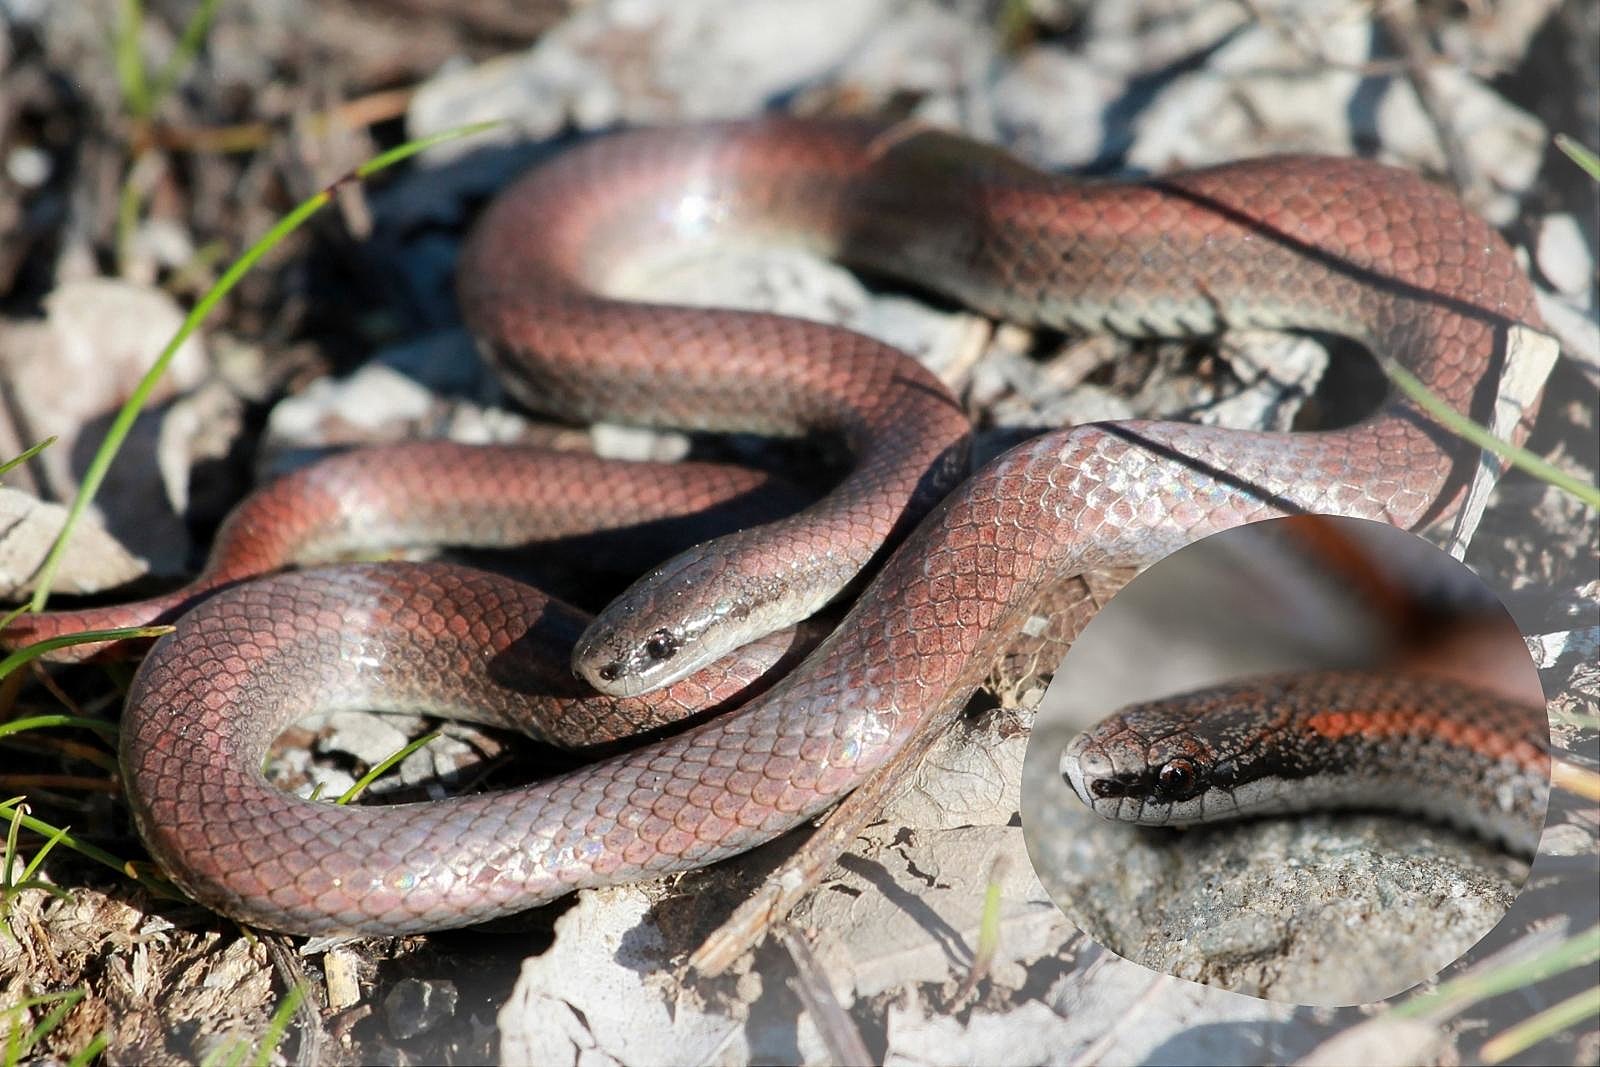 A copper colored Sharptail Snake, with an inset close up of its head.